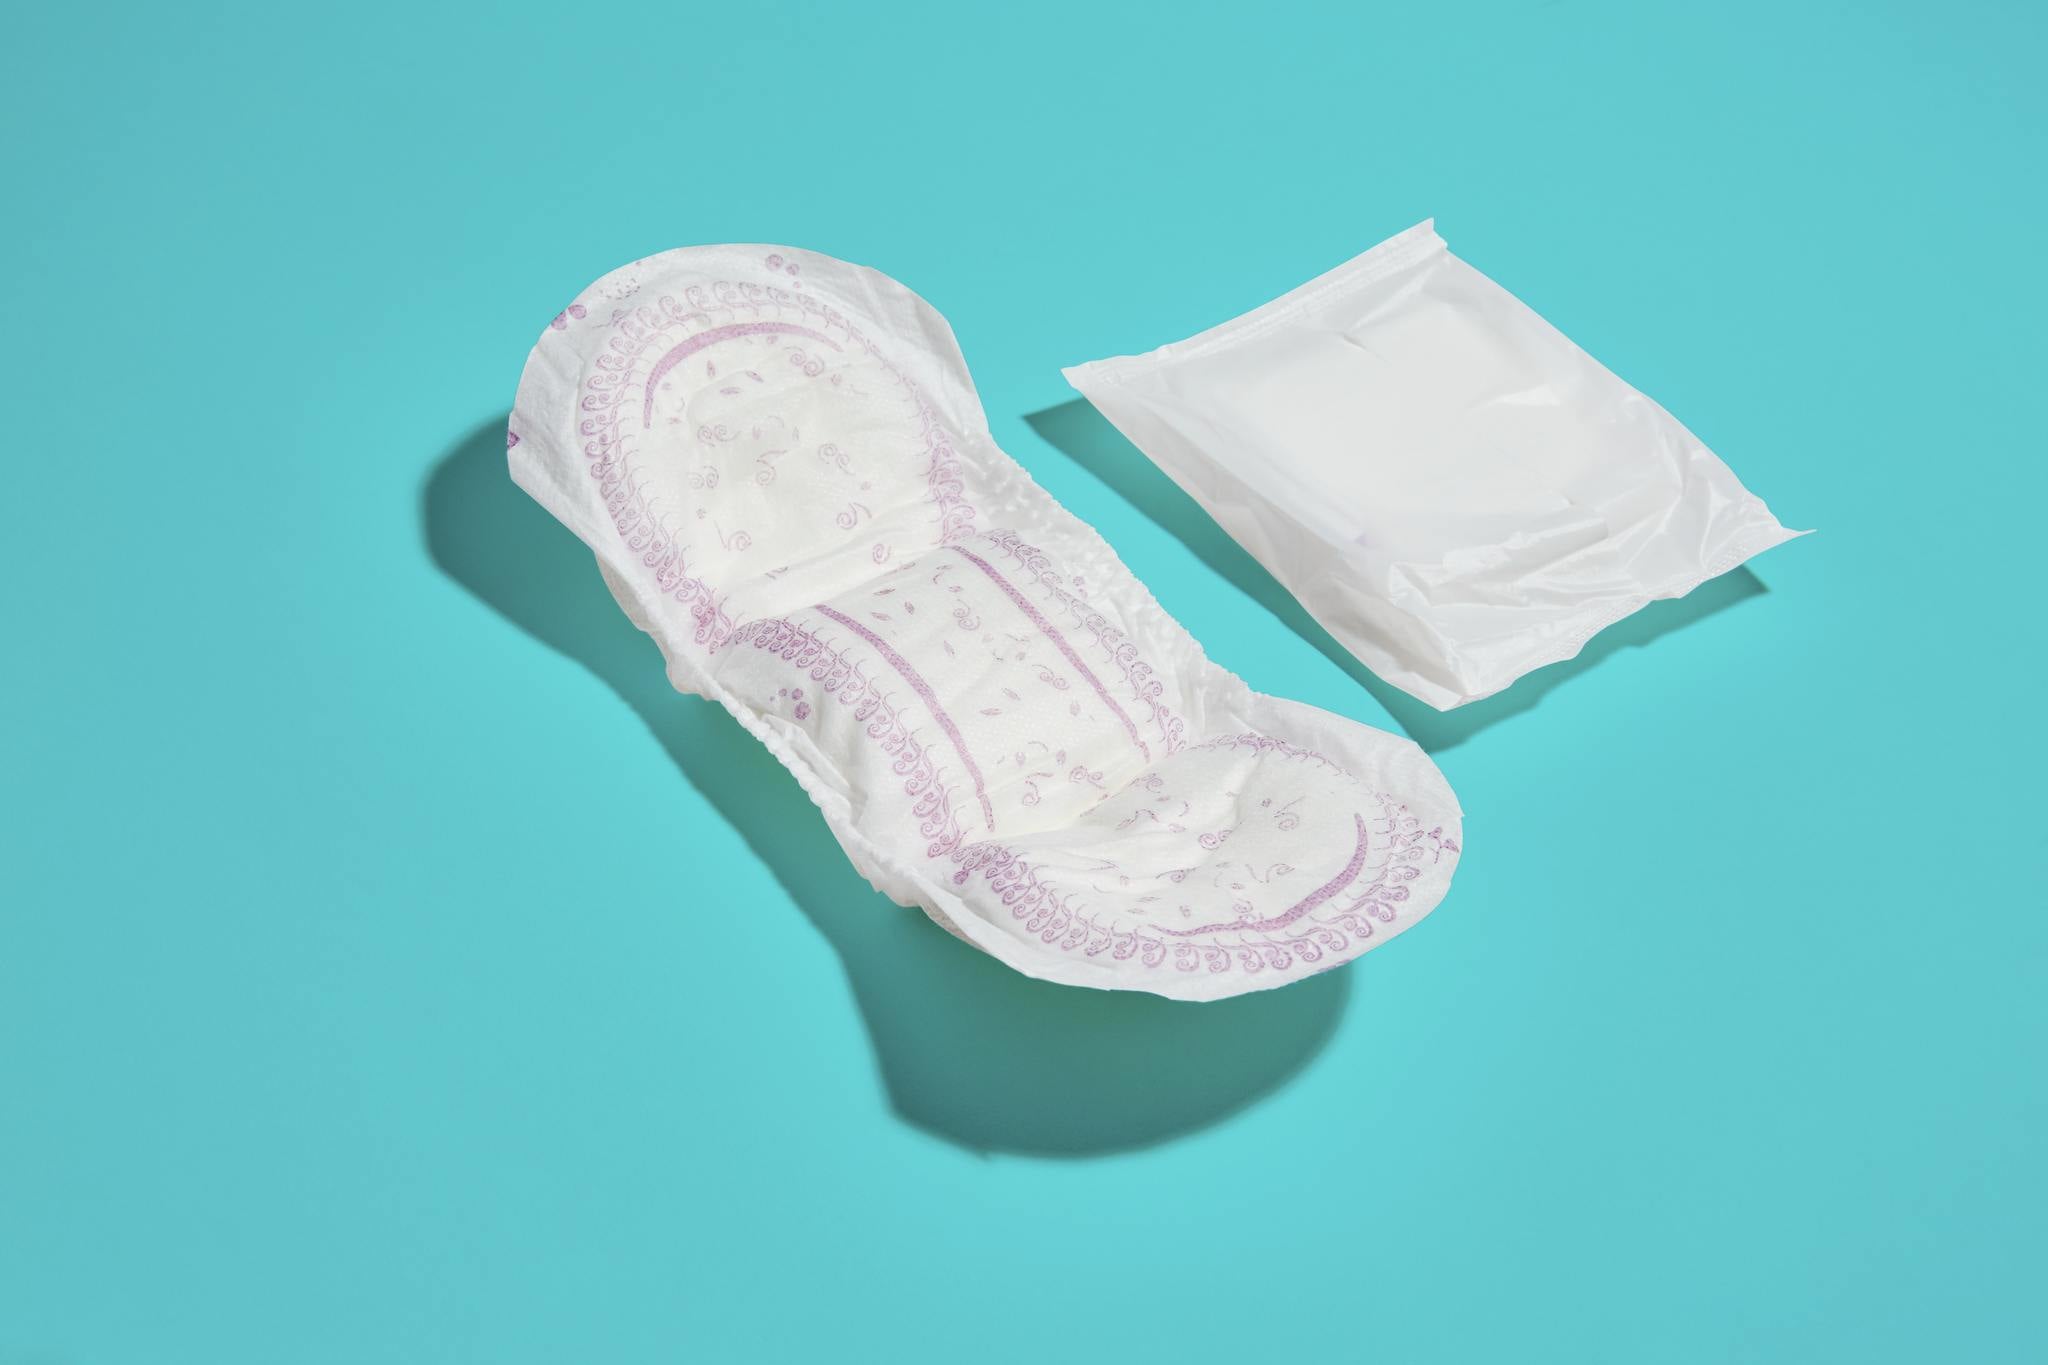 securing incontinence pads to mattress